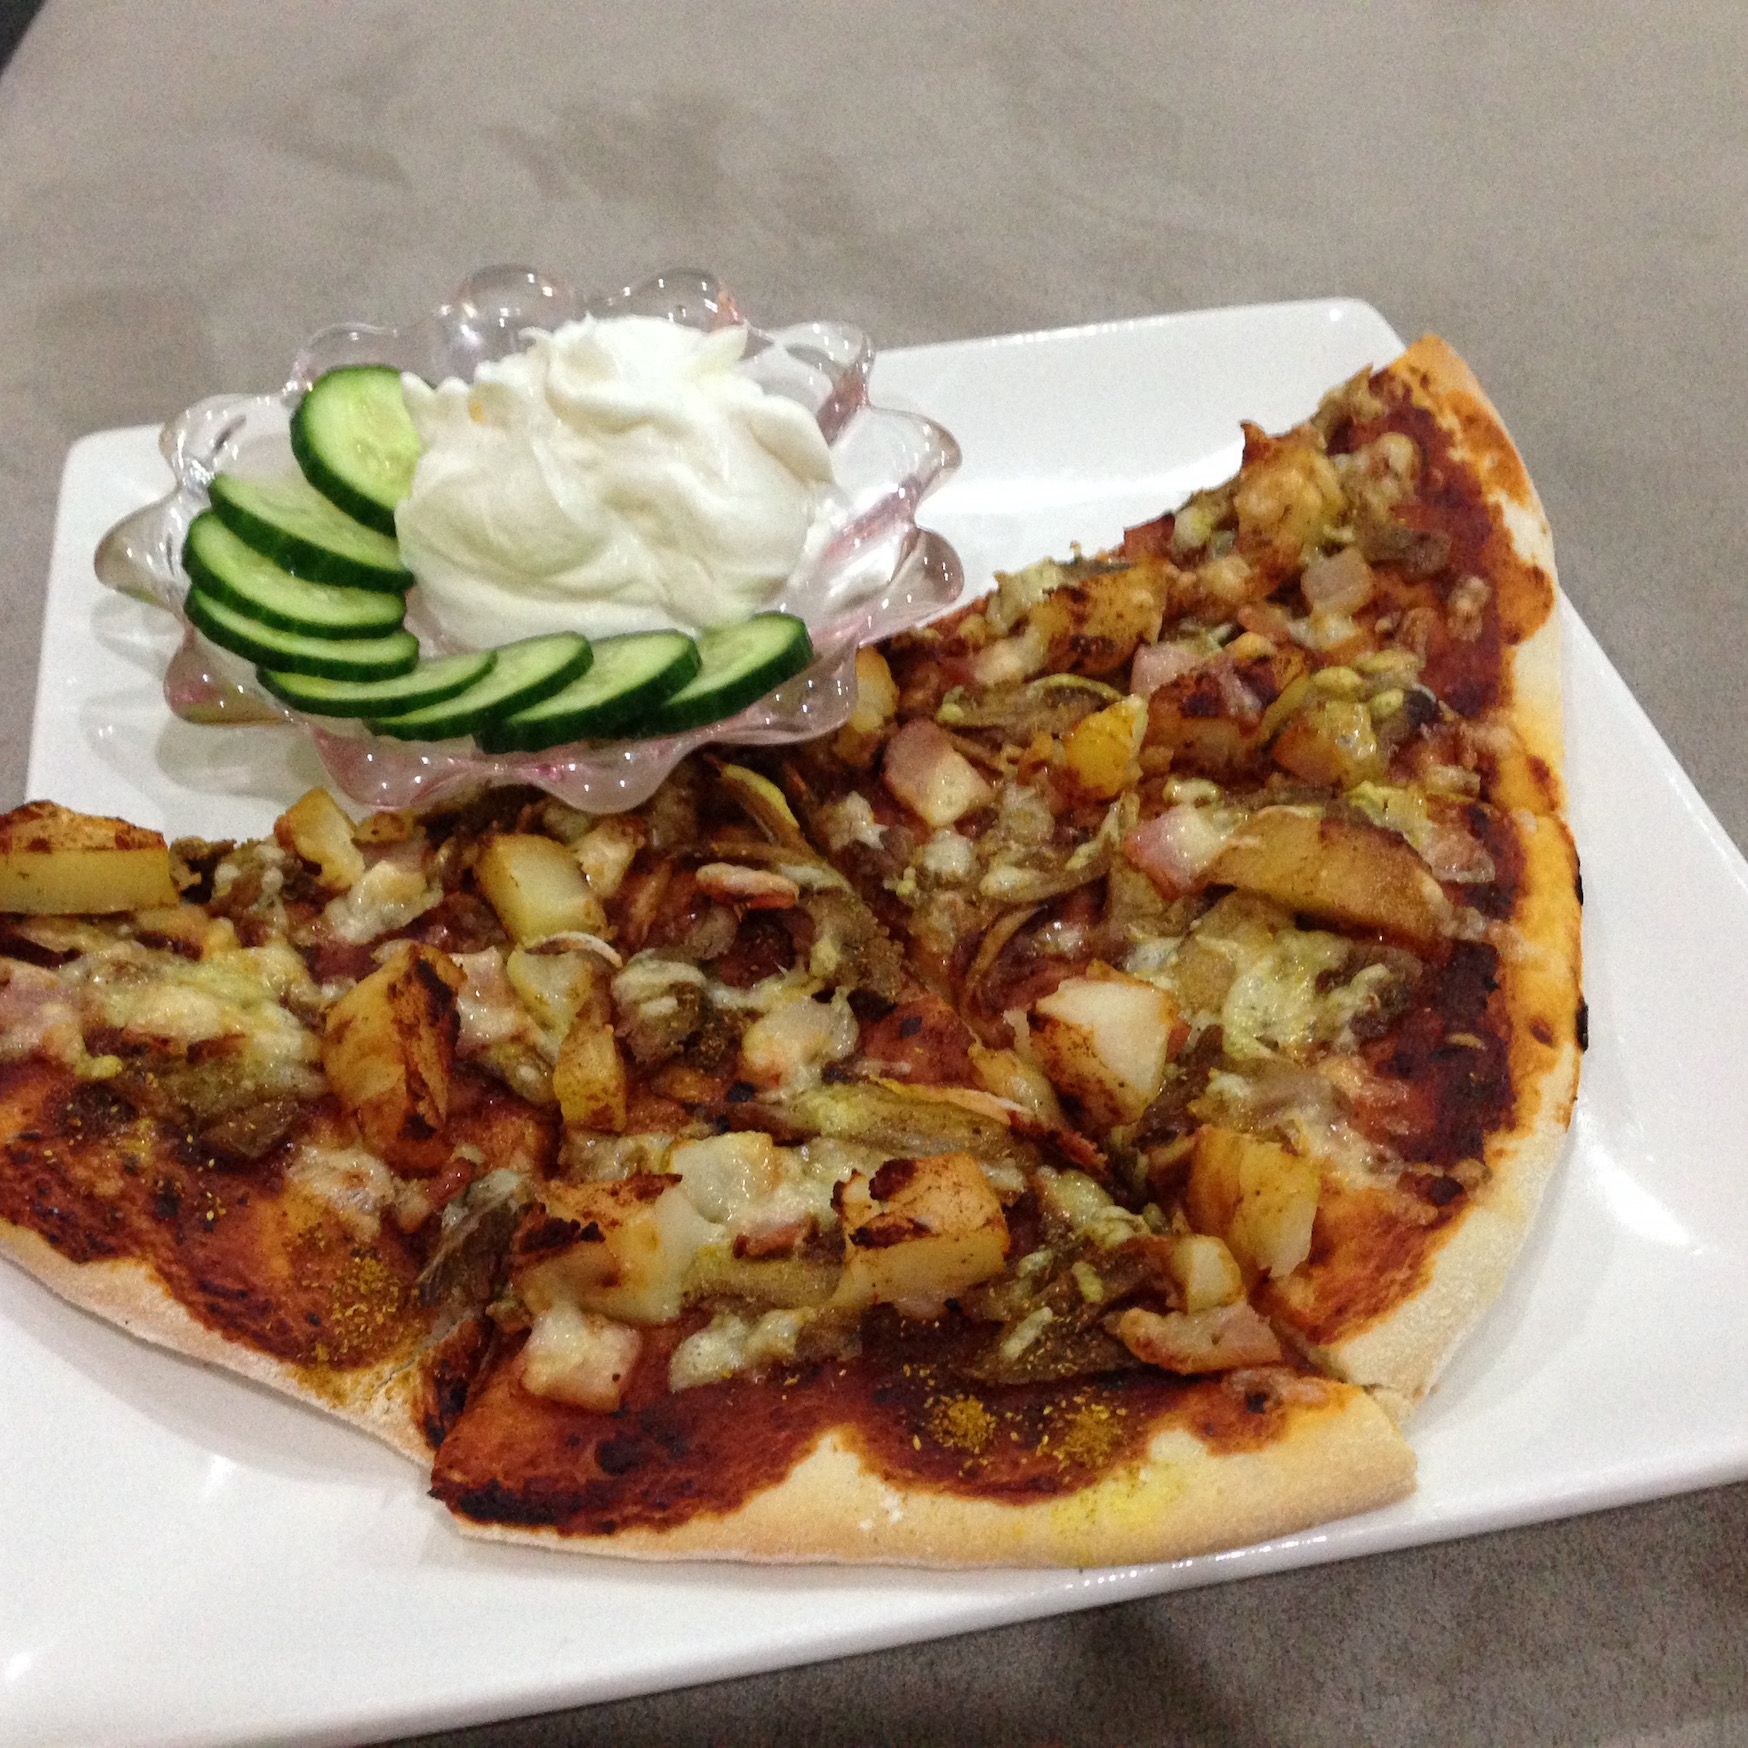 home made pizza with cucumber and yoghurt dip